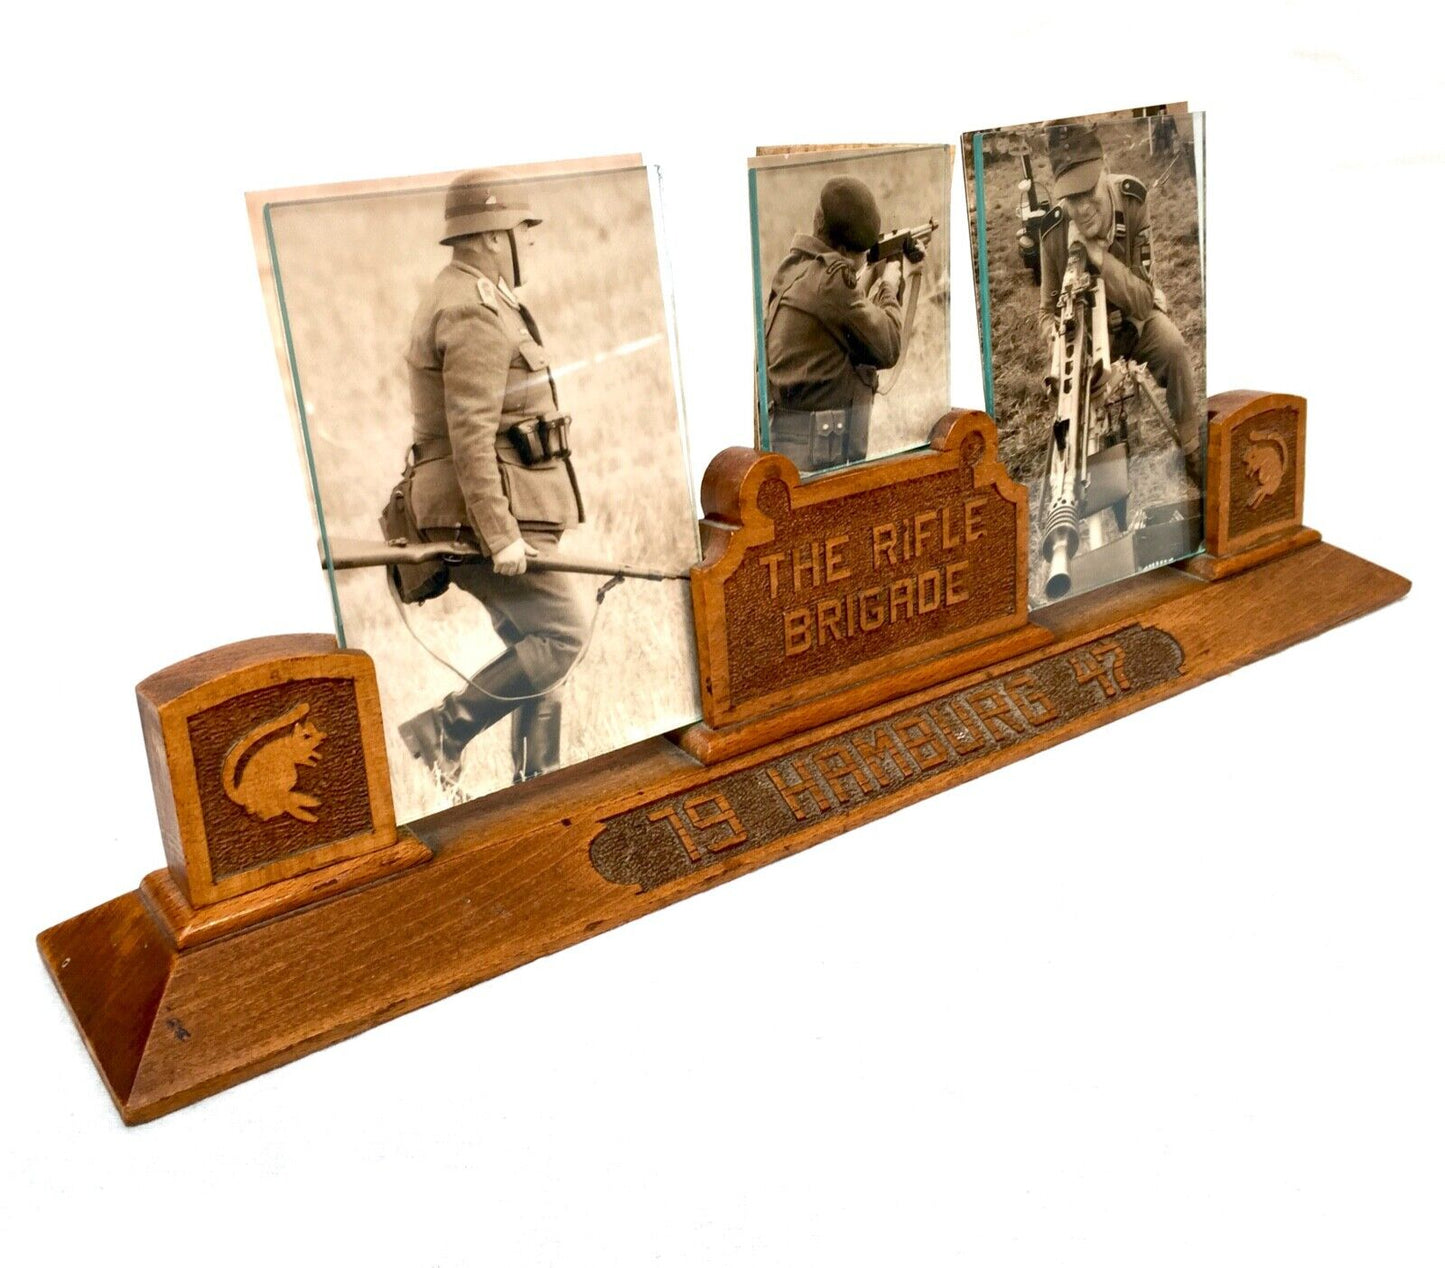 Antique Military Wooden Tabletop Photo Frame - The Rifle Brigade Hamburg 1947